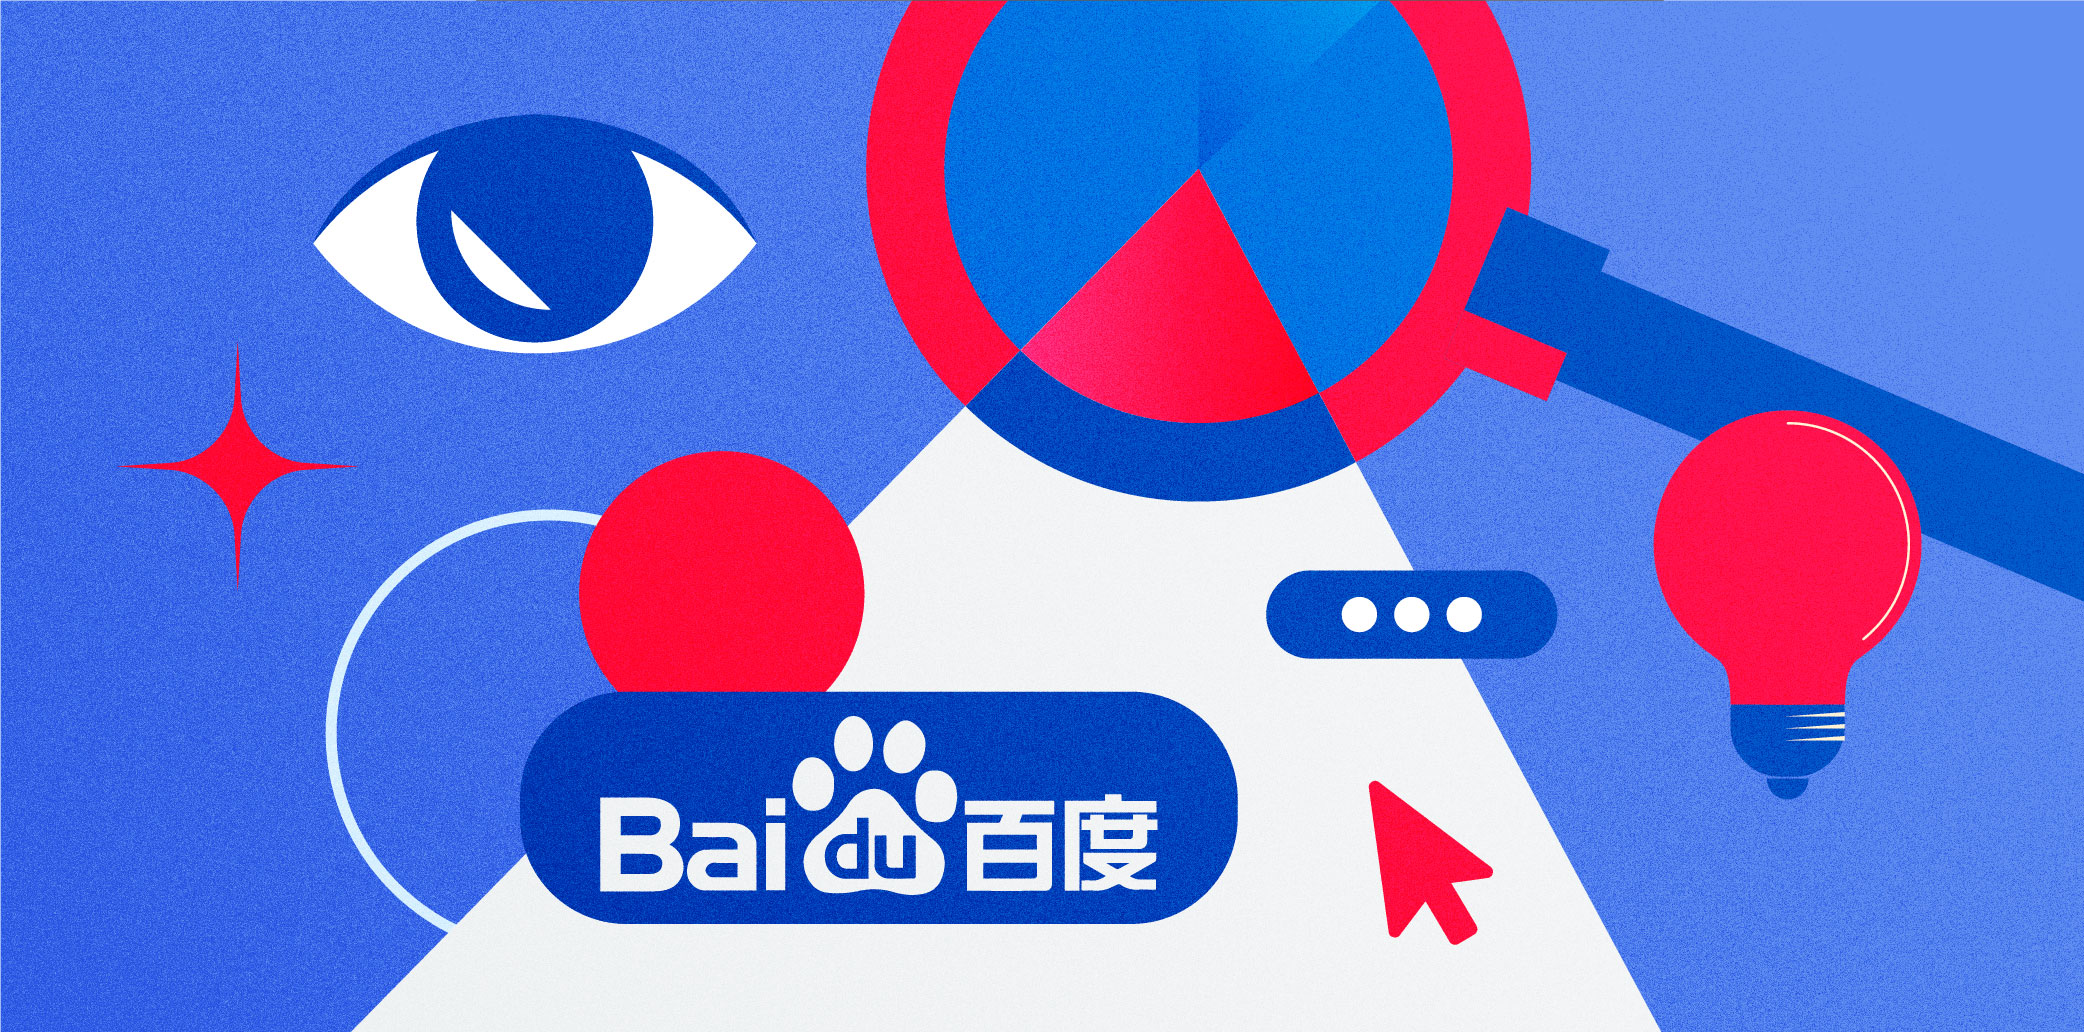 Baidu’s Q2 results meet expectations but outlook dims amid COVID-19 resurgence